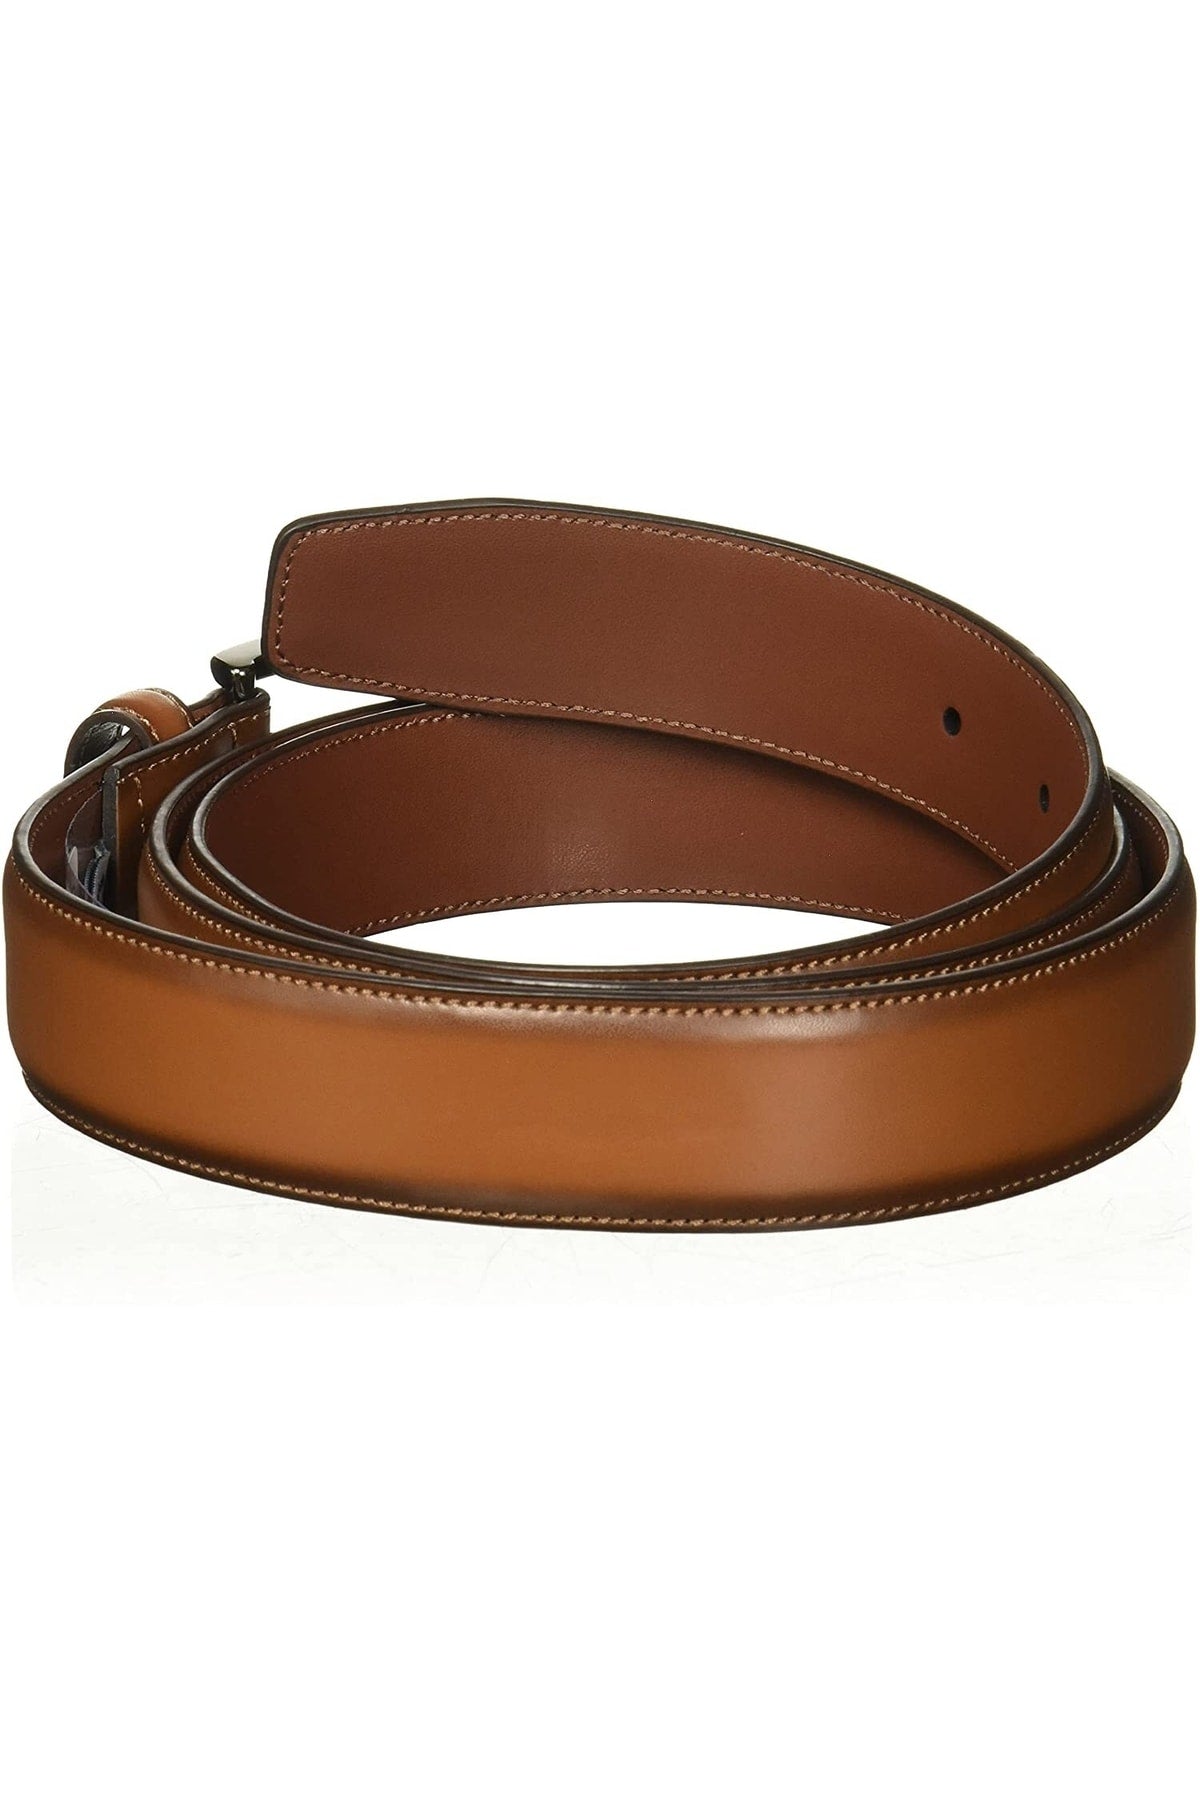 Men's Classic Men's Belt Fabric And Canvas For Trousers